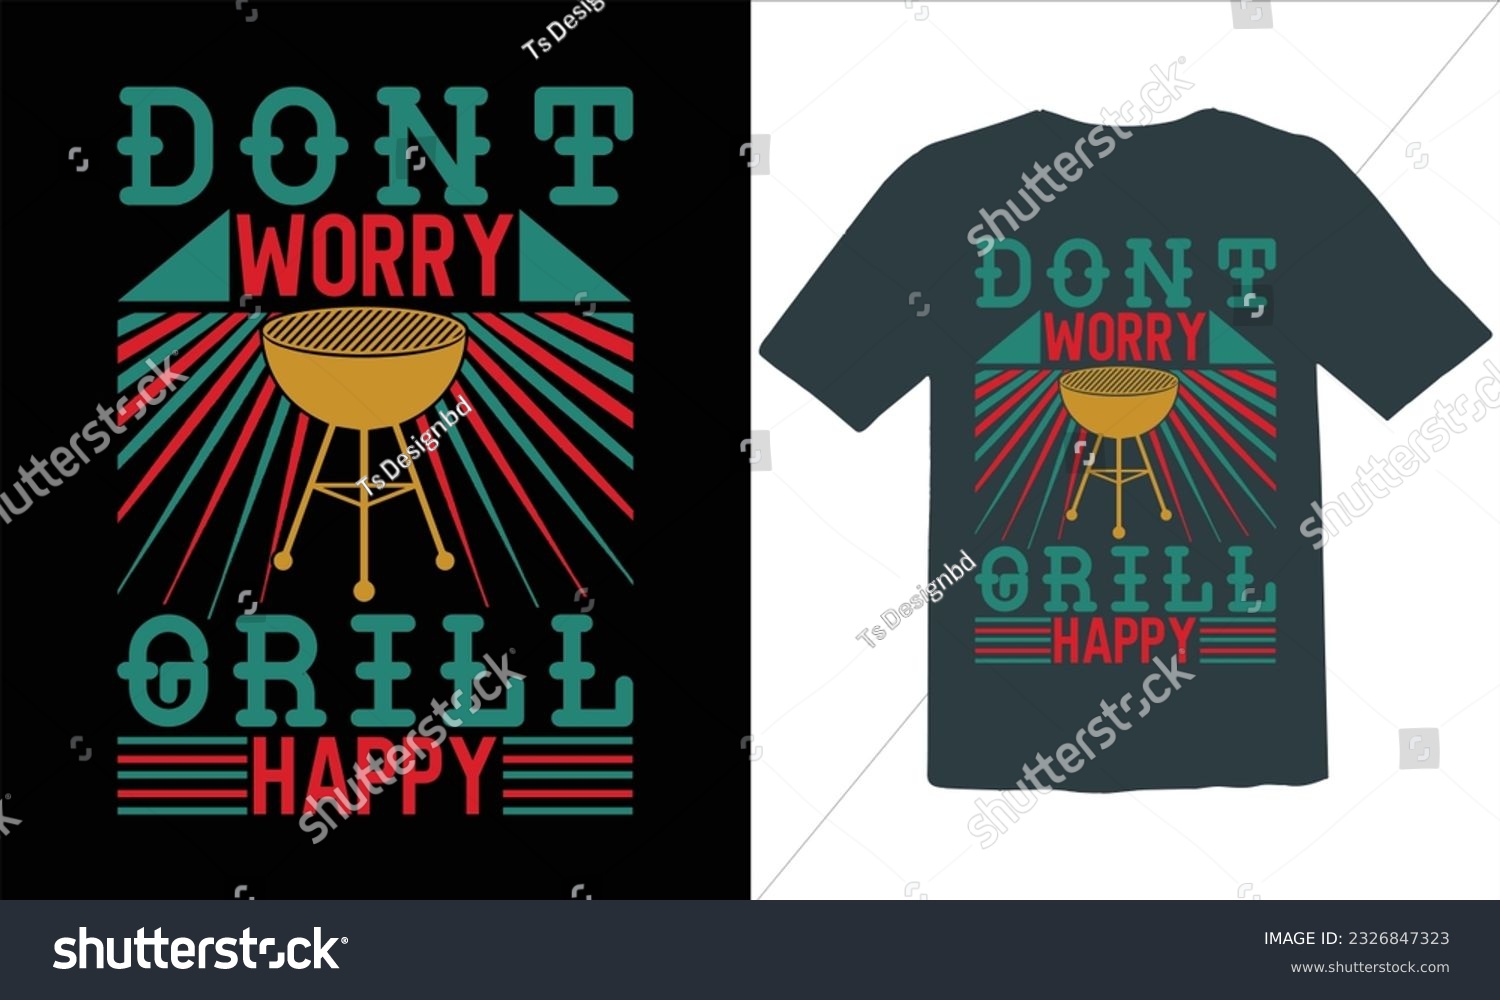 SVG of  Don't Worry Grill Happy  T Shirt Design,BBQ T-shirt design,typography BBQ shirts design,BBQ Grilling shirts design vectors,Barbeque t-shirt,Typography vector T-shirt design,Funny BBQ Shirt svg